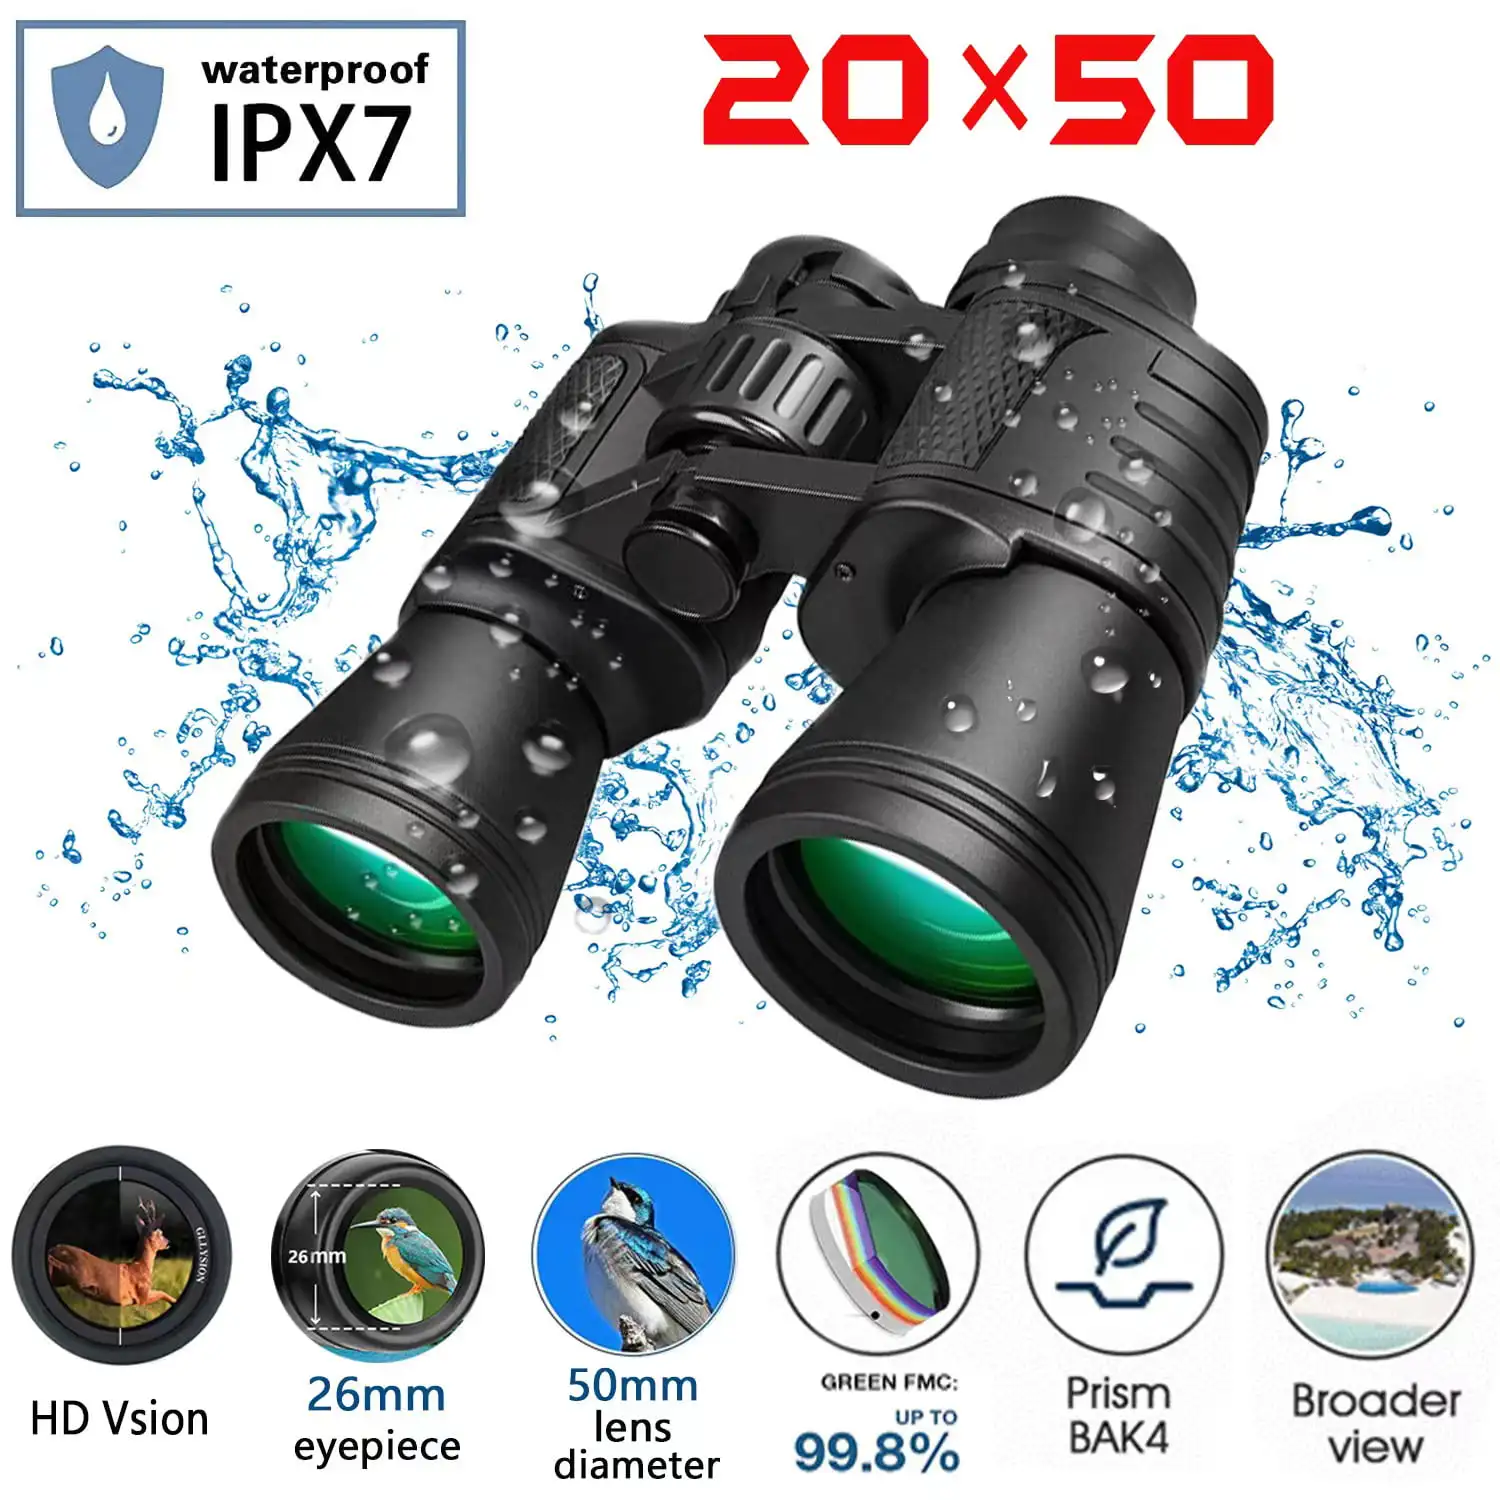 

20x50 Binoculars for Adults HD Day Light Night Binoculars with BAK4 Prism FMC Lens for Hunting Watching Concert etc IPX7 Waterp